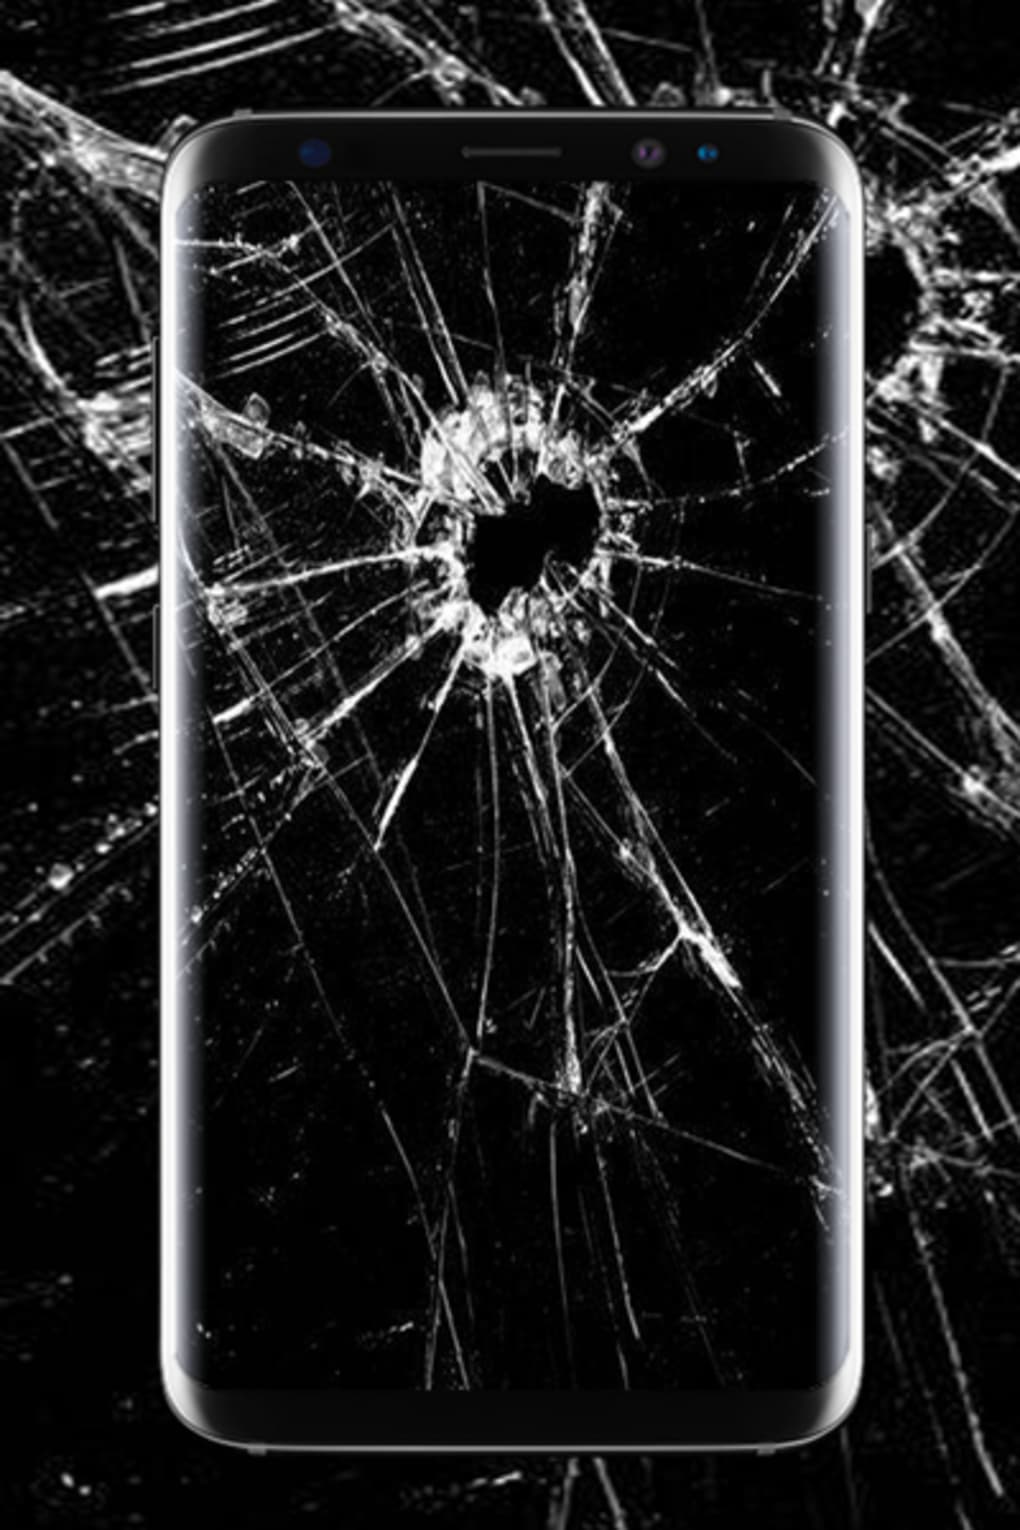 Well Dressed Wallpaper Abstract Glass Black Broken Stock Great Apple  Shattered Glass Iphone Hd Wallpaper High Resolution Image Wallpapers For  Desktop Android Facebook Pc Mobile Mac Ios  फट शयर